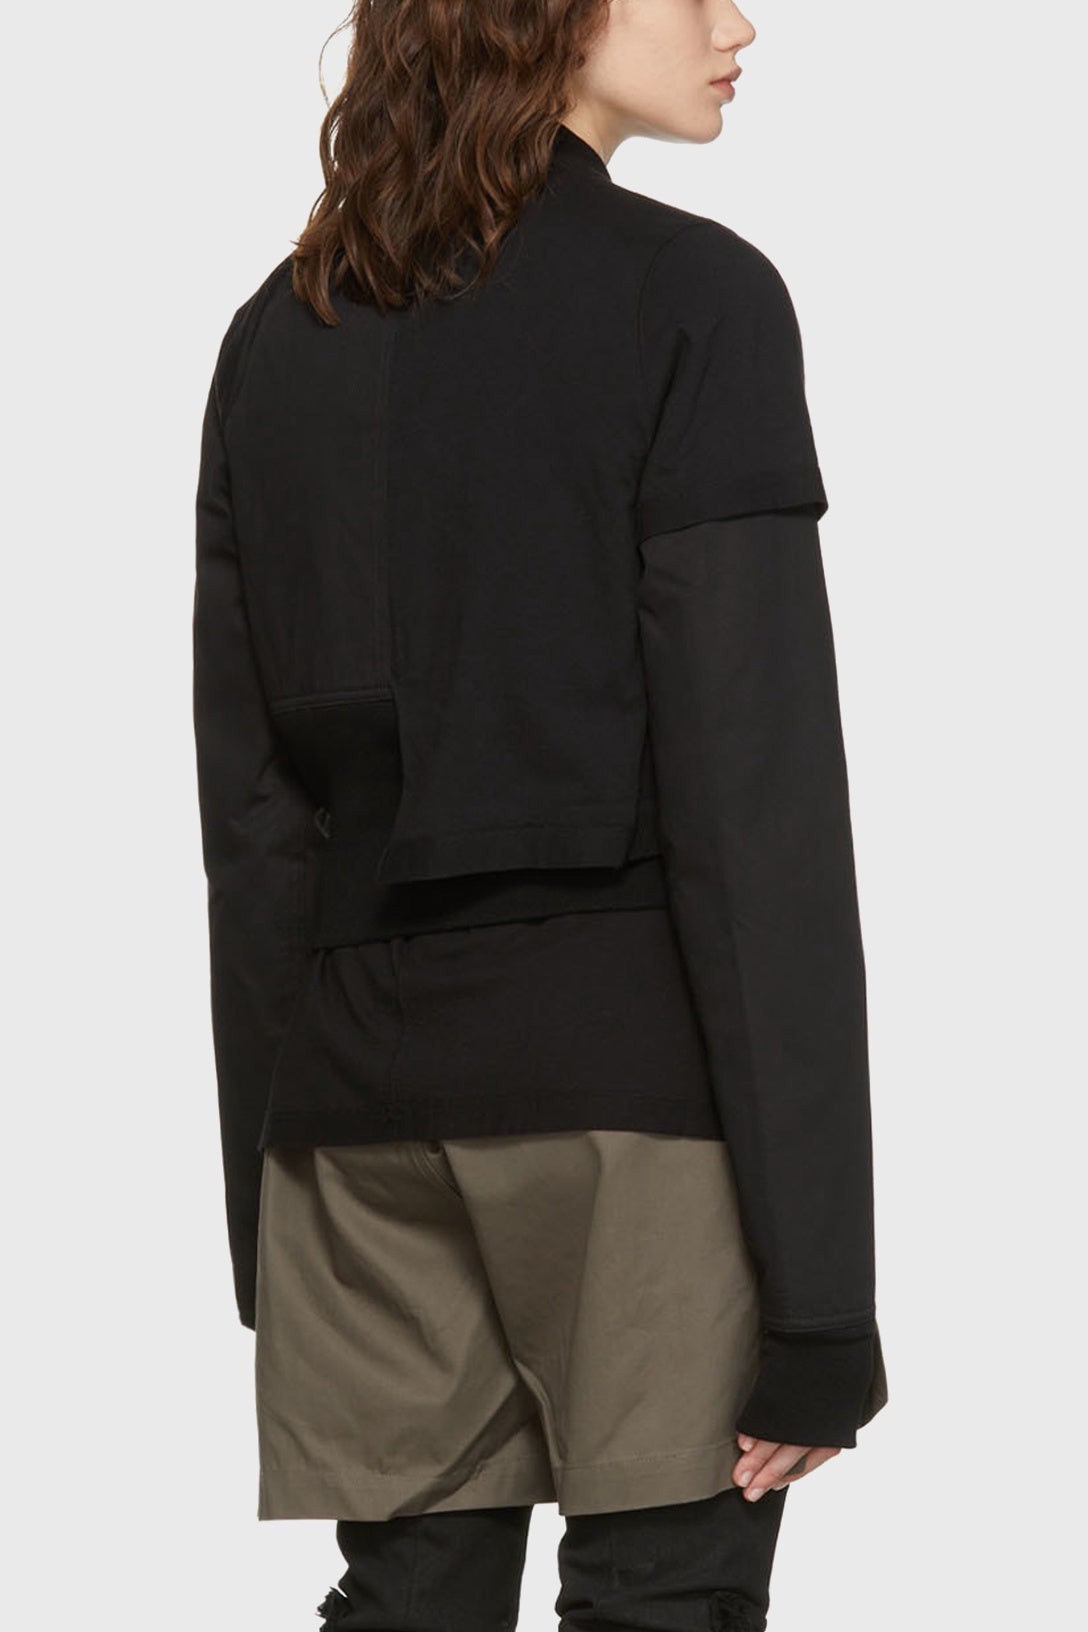 Faun Bomber - Black/oyster in Black - The Shelter